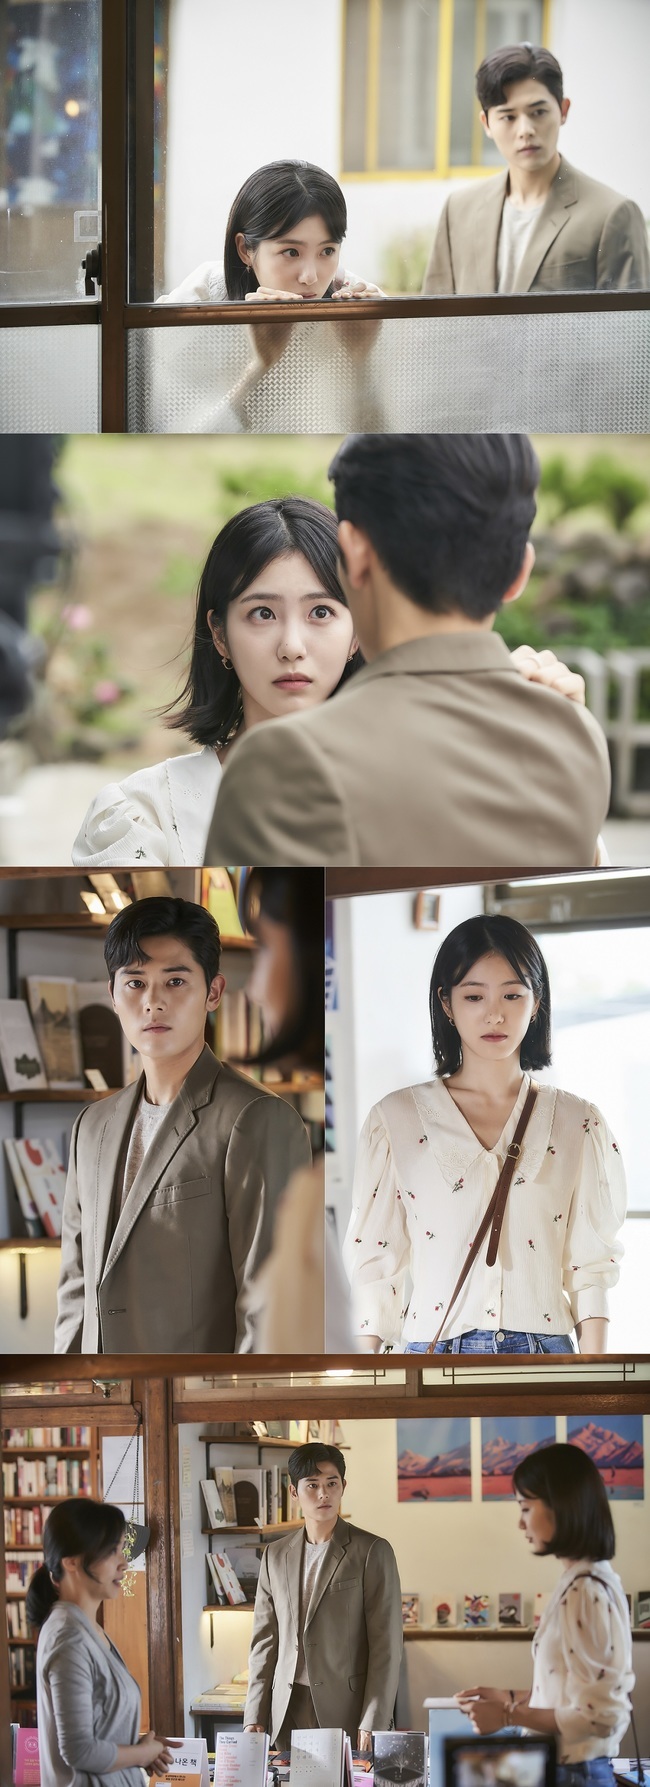 Could Shin Ye-eun, Kim Dong-juns coincidence lead to a relationship?JTBCs new gilt drama The Number of Cases (playplayed by Cho Seung-hee/directed by Choi Sung-beom), which will be broadcast first on September 25, unveiled the fateful first meeting between Shin Ye-eun and Kim Dong-jun on the 18th.The number of executives depicts the real youth romance of two men and women who love each other for 10 years.The number of women who have hidden their hearts after a long unrequited love, a man who realizes his heart and reveals his heart, and a lover in a friend causes a thrilling excitement.The combination of Ong Sung-woo, Shin Ye-eun, Kim Dong-jun, Pyo Hoon, Ahn Eun-jin, Choi Chan-ho and Baek Soo-min, who will draw the stories of colorful youths in a pleasant and honest manner, is raising the expectation of drama fans.The photo, which was released on the day, raises curiosity by showing the appearance of Yeon Yeon and On Jun Su in a Heavens Bookstore in Jeju Island.When she looks out at the dynamics in Heavens Bookstore, she is surprised by the gentle appearance of On Jun-su.The moment of the first moment of a moment of unforgettable encounter raises the heart rate, and it seems that another incident has occurred for the two people who entered Heavens Bookstore.When you look at a face with a postcard, it is interesting to see the Yeon and the On Junsu looking at it. I wonder what kind of relationship the two people who come across will go to.In the highlight video released earlier, the first meeting between Yeon Yeon and On Jun Su was included.When Heavens Bookstore door was blocked, Onjunsu spoke to Yeon, and when he was surprised by the sudden sound, Yeon was on his feet.At a dangerous moment when I almost fell, Onjunsu caught me and a strange atmosphere was formed between the two people I met for the first time.If you think it is a coincidence, it stimulates the expectation that the meeting between Yeon and Onjun will lead to fate.minjee Lee